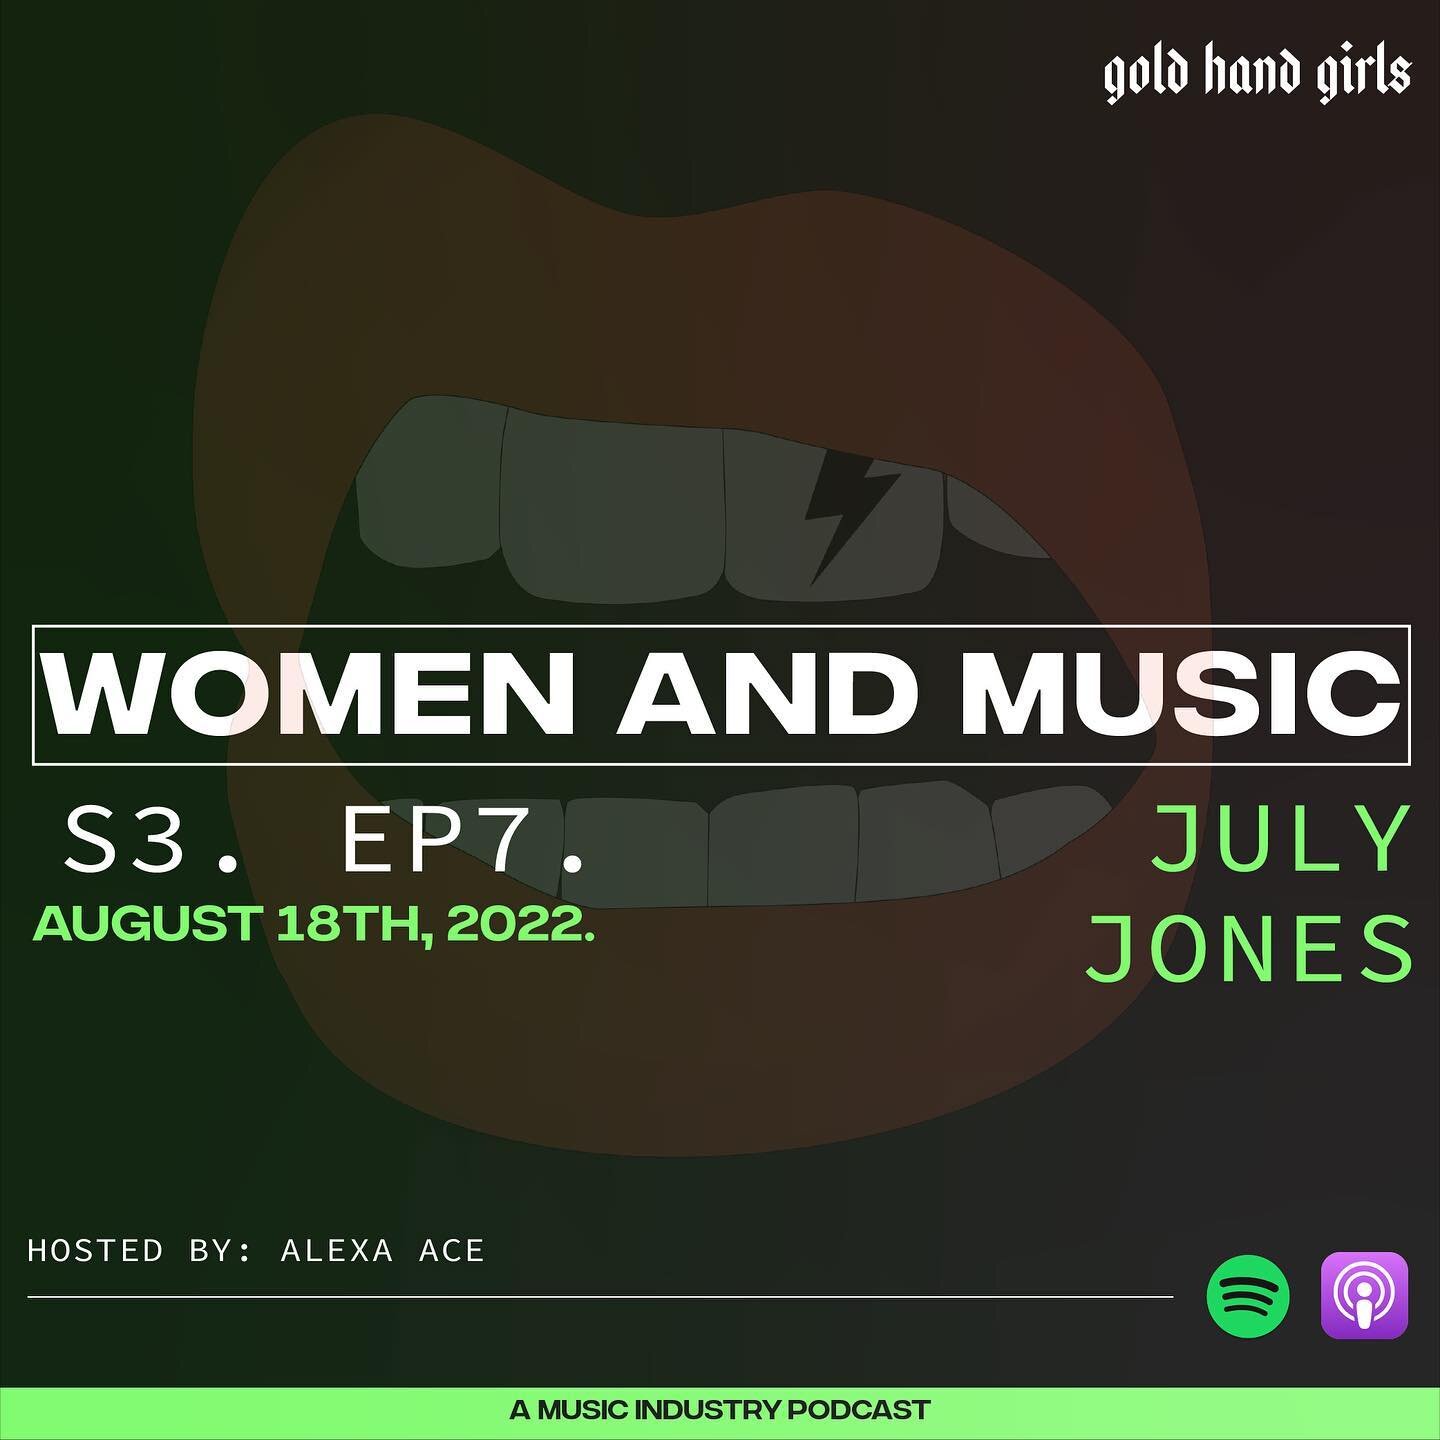 ⚠️ Postponed! ⚠️ S3. EP7. ft. @julyjones now out 8/18 ❤️ July is a mega inspiration for us. Wait until you hear about her tenacity to succeed in music as an immigrant, queer-activist, and multi-talented musician. From Slovenia, to America, to London 